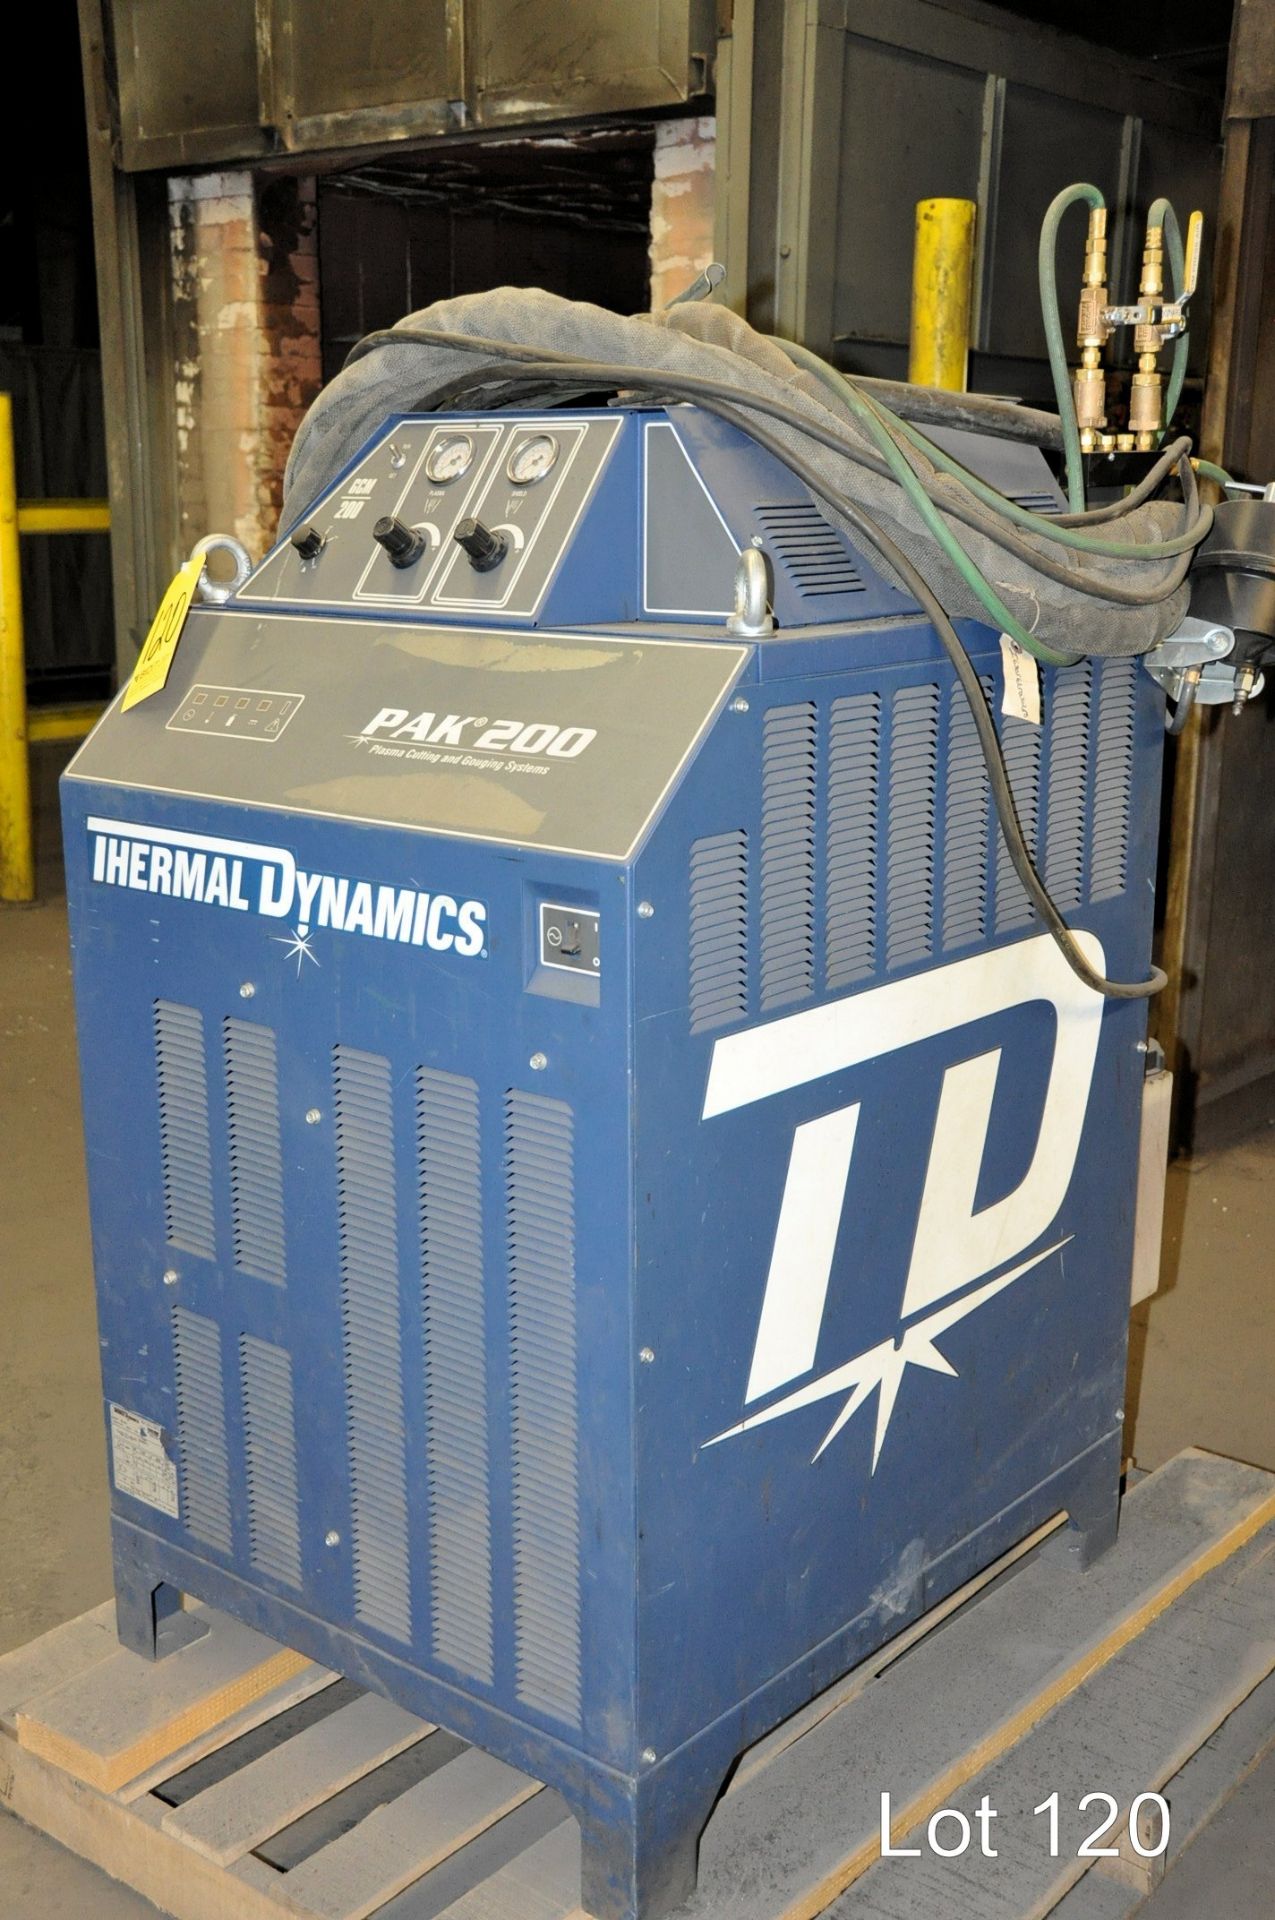 2012 THERMAL DYNAMICS MODEL PAK 200, Plasma Cutting and Gouging System, S/N JP1237009, with Leads - Image 2 of 3